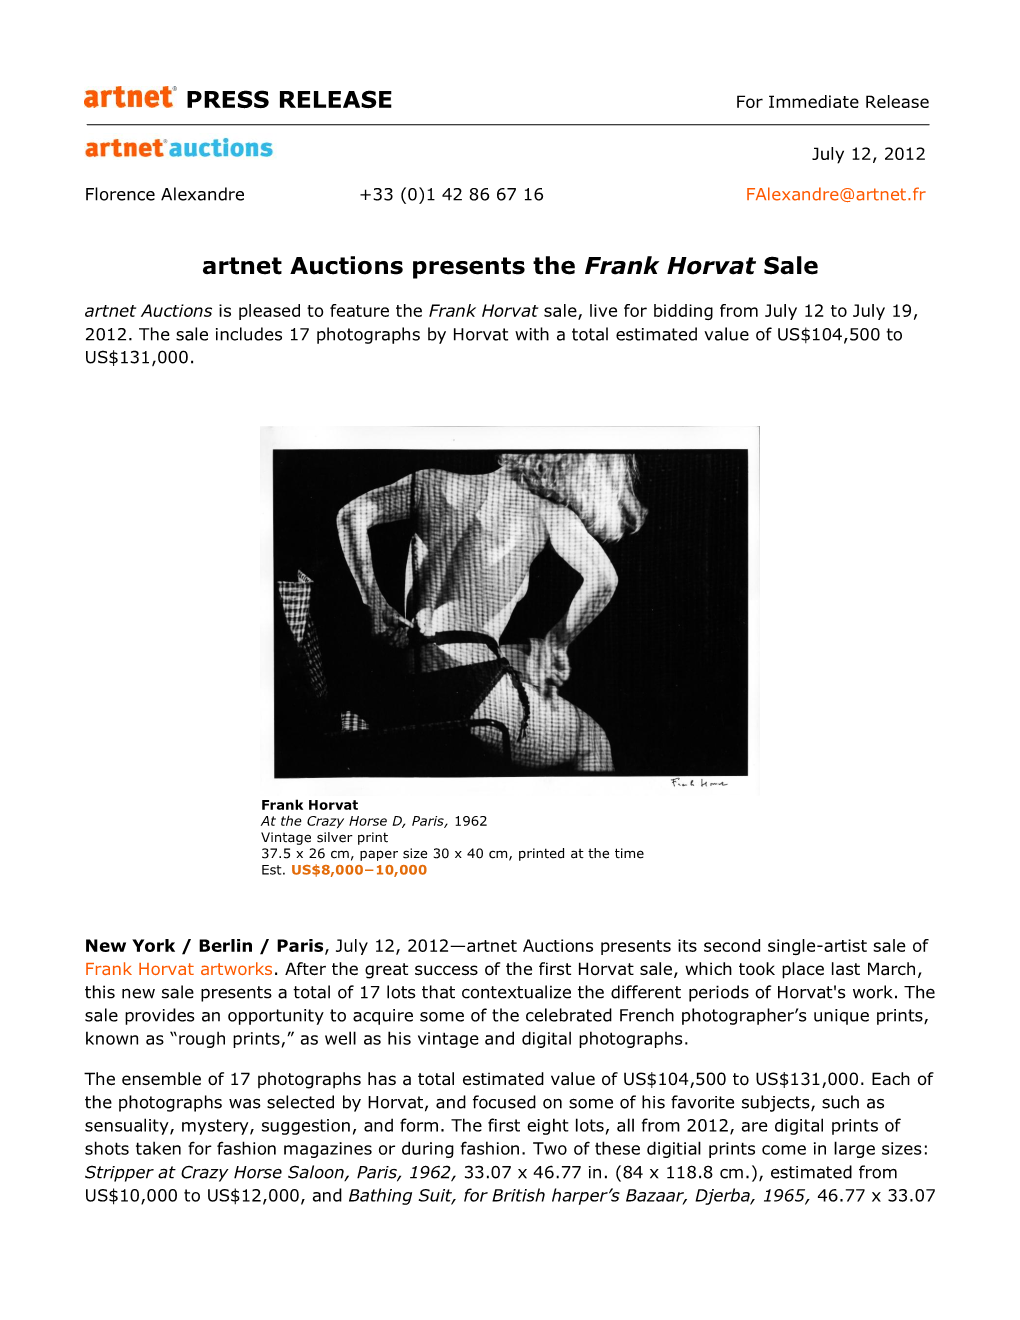 Frank Horvat Sale Artnet Auctions Is Pleased to Feature the Frank Horvat Sale, Live for Bidding from July 12 to July 19, 2012